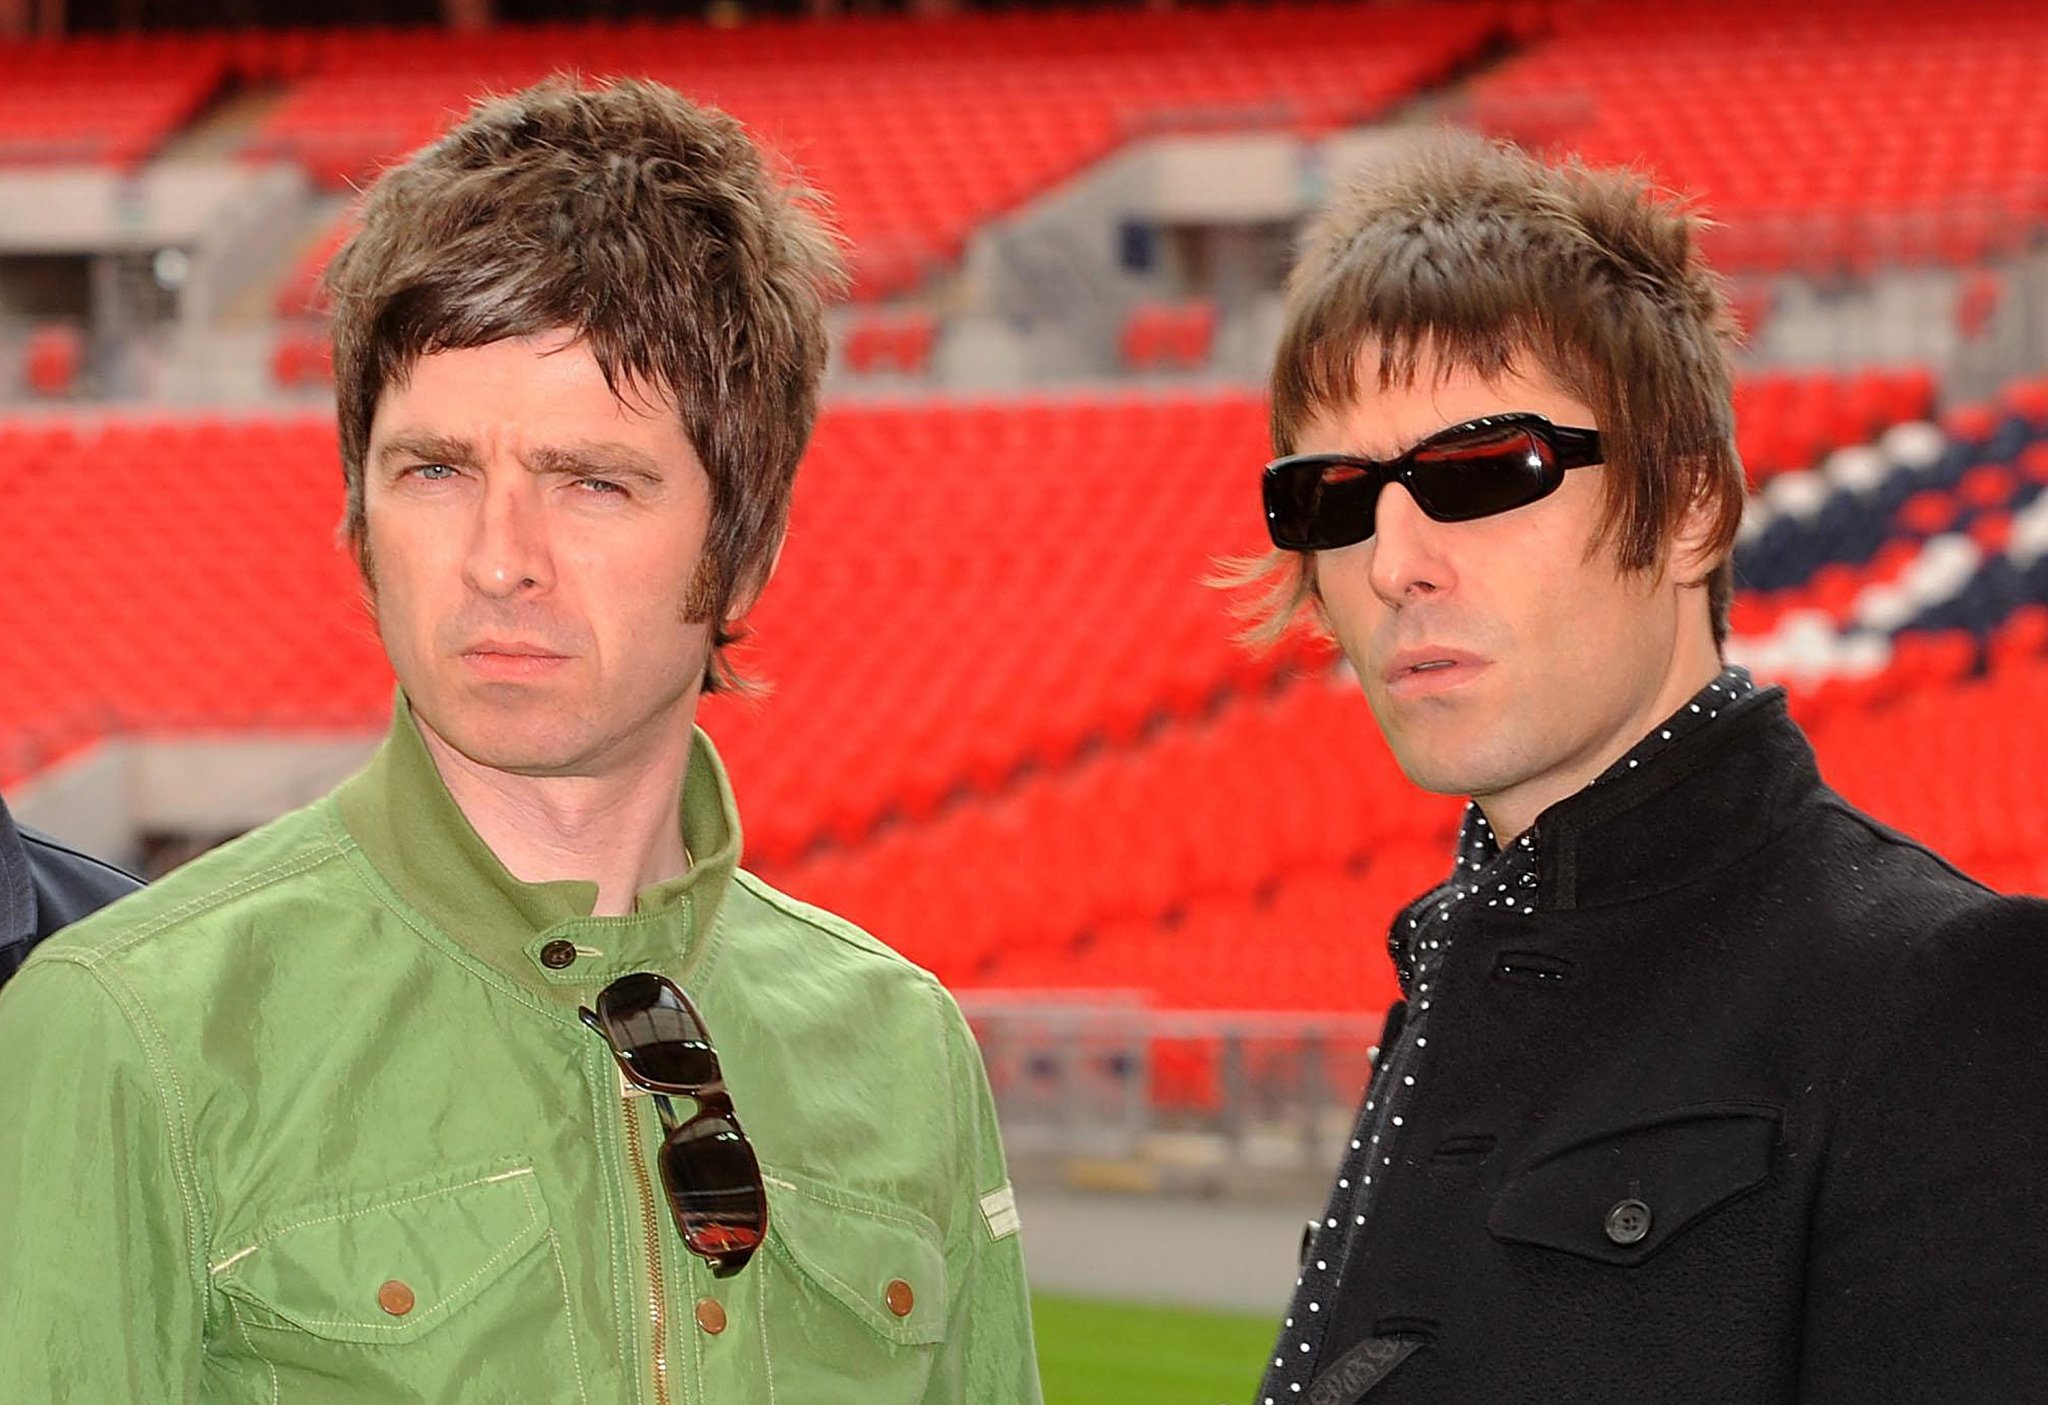 Liam Gallagher Mocks Ongoing Feud With Noel Gallagher Amid Coronavirus Pandemic